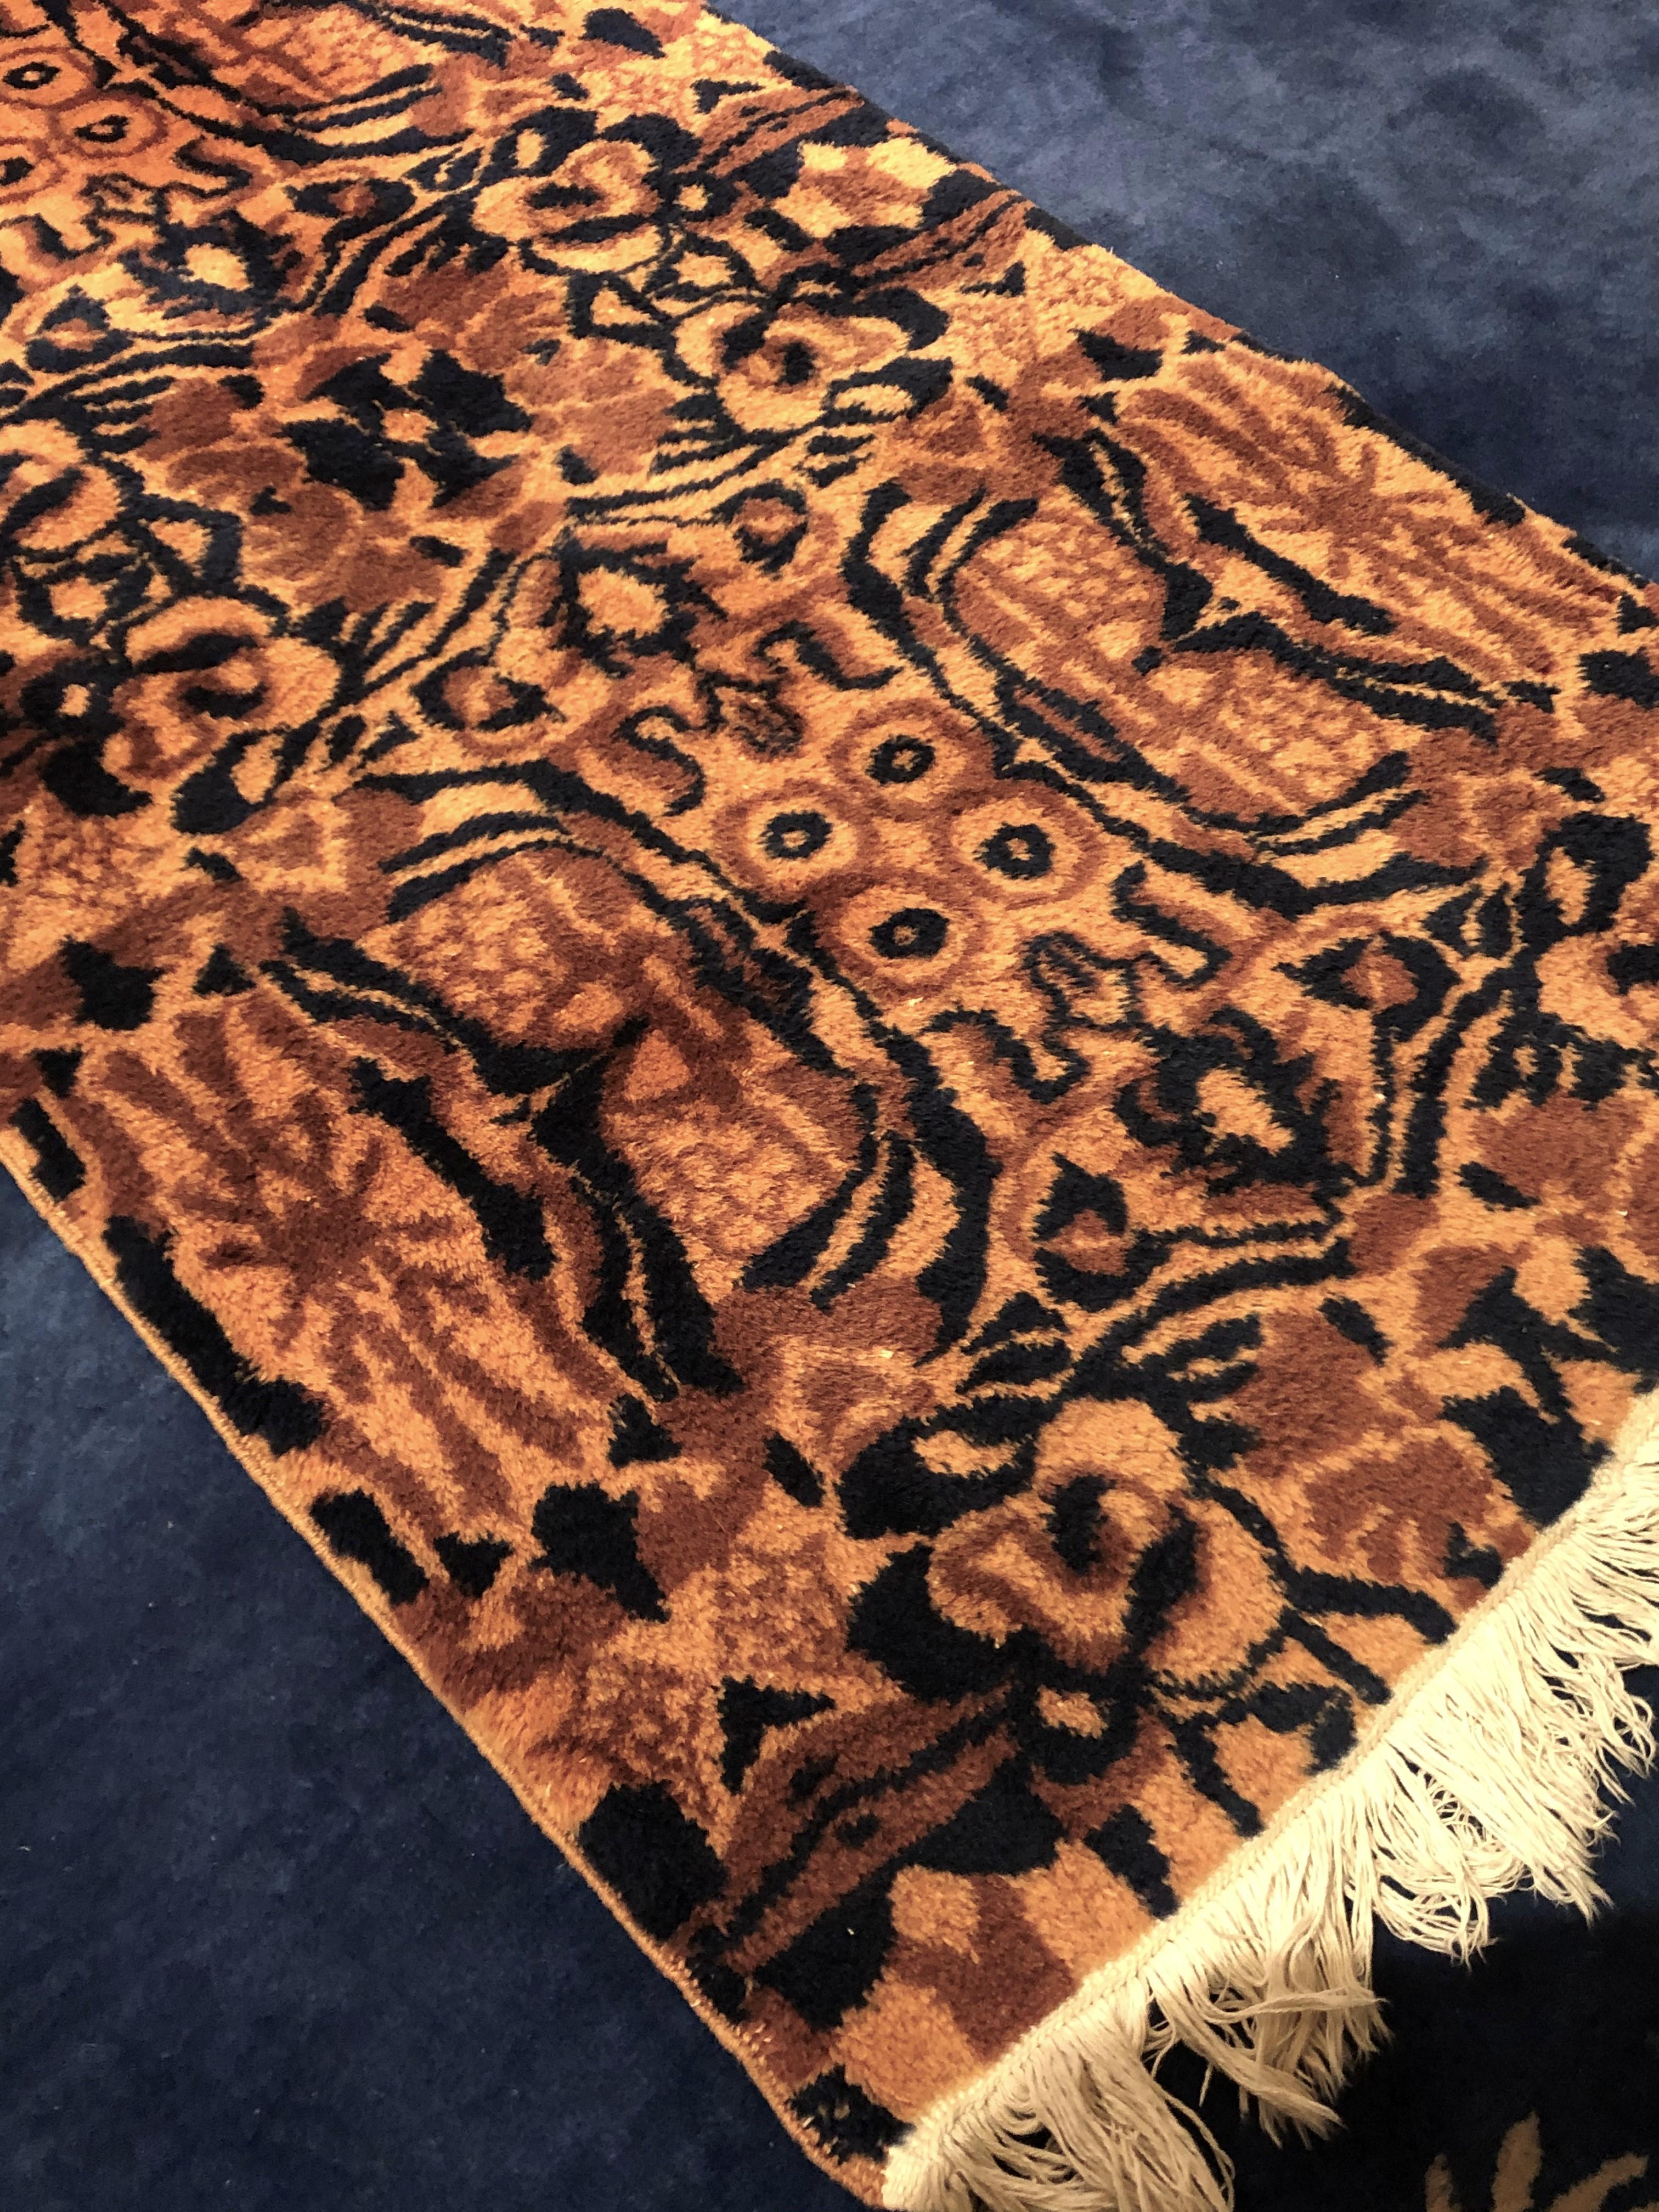 Hand-Knotted 20th Century Pink Beige Black Tiger's Fur Rug, Zeki Muran from Turkey circa 1950 For Sale